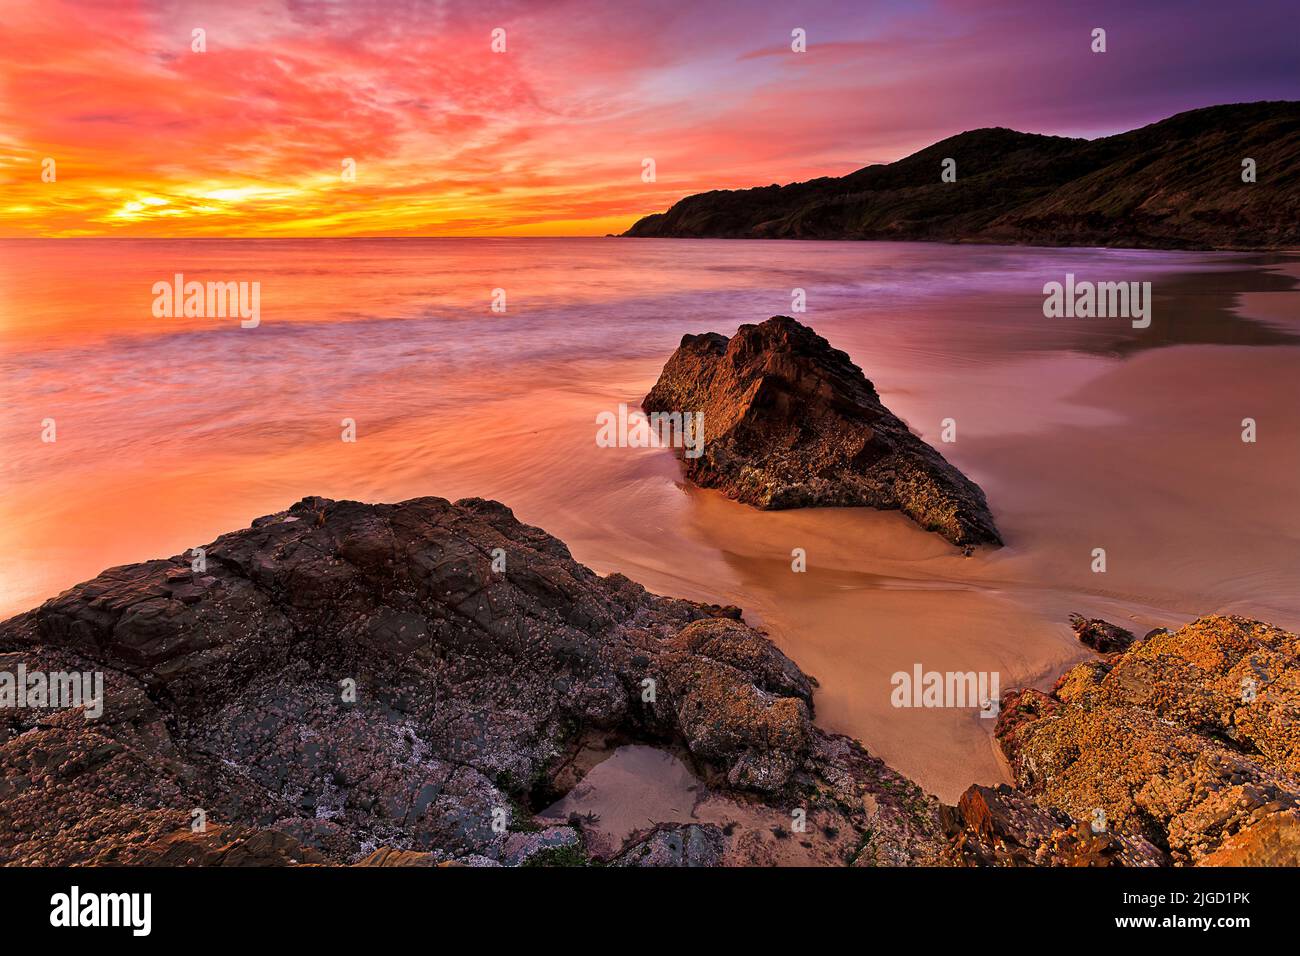 Bright hot red sunrise over Pacific ocean at Forster town Burgess beach with scenic rock cliffs and smooth sand. Stock Photo